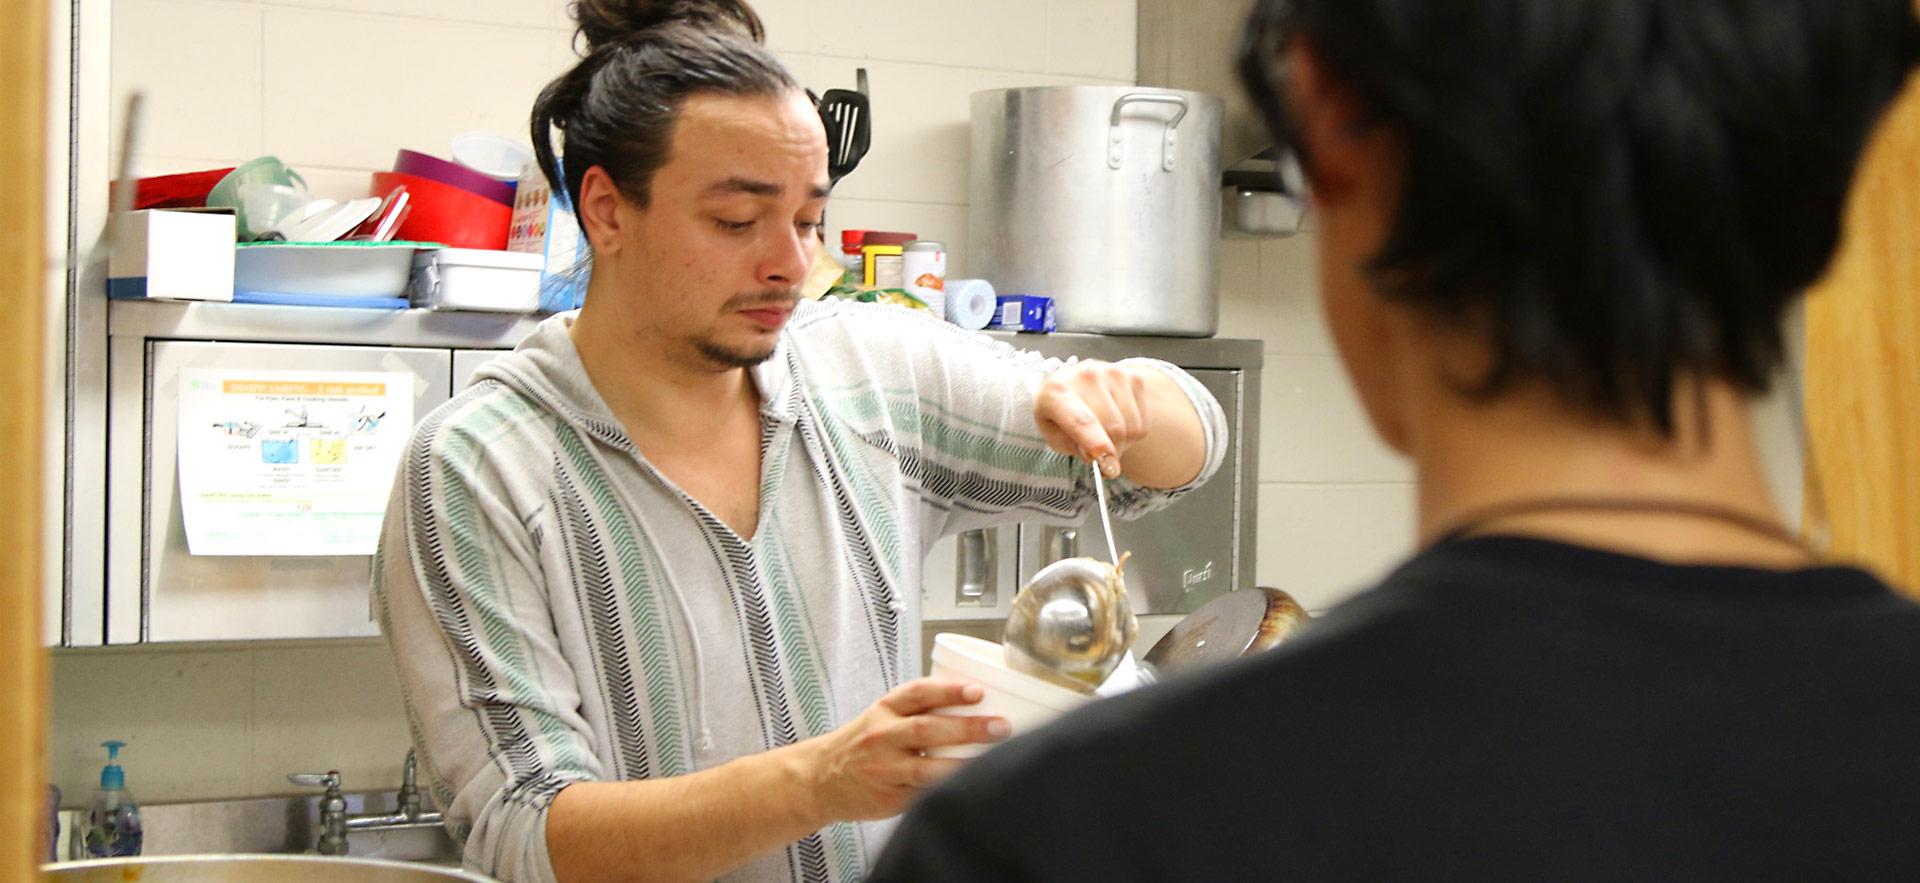 indigenous student in kitchen pouring soup into a cup